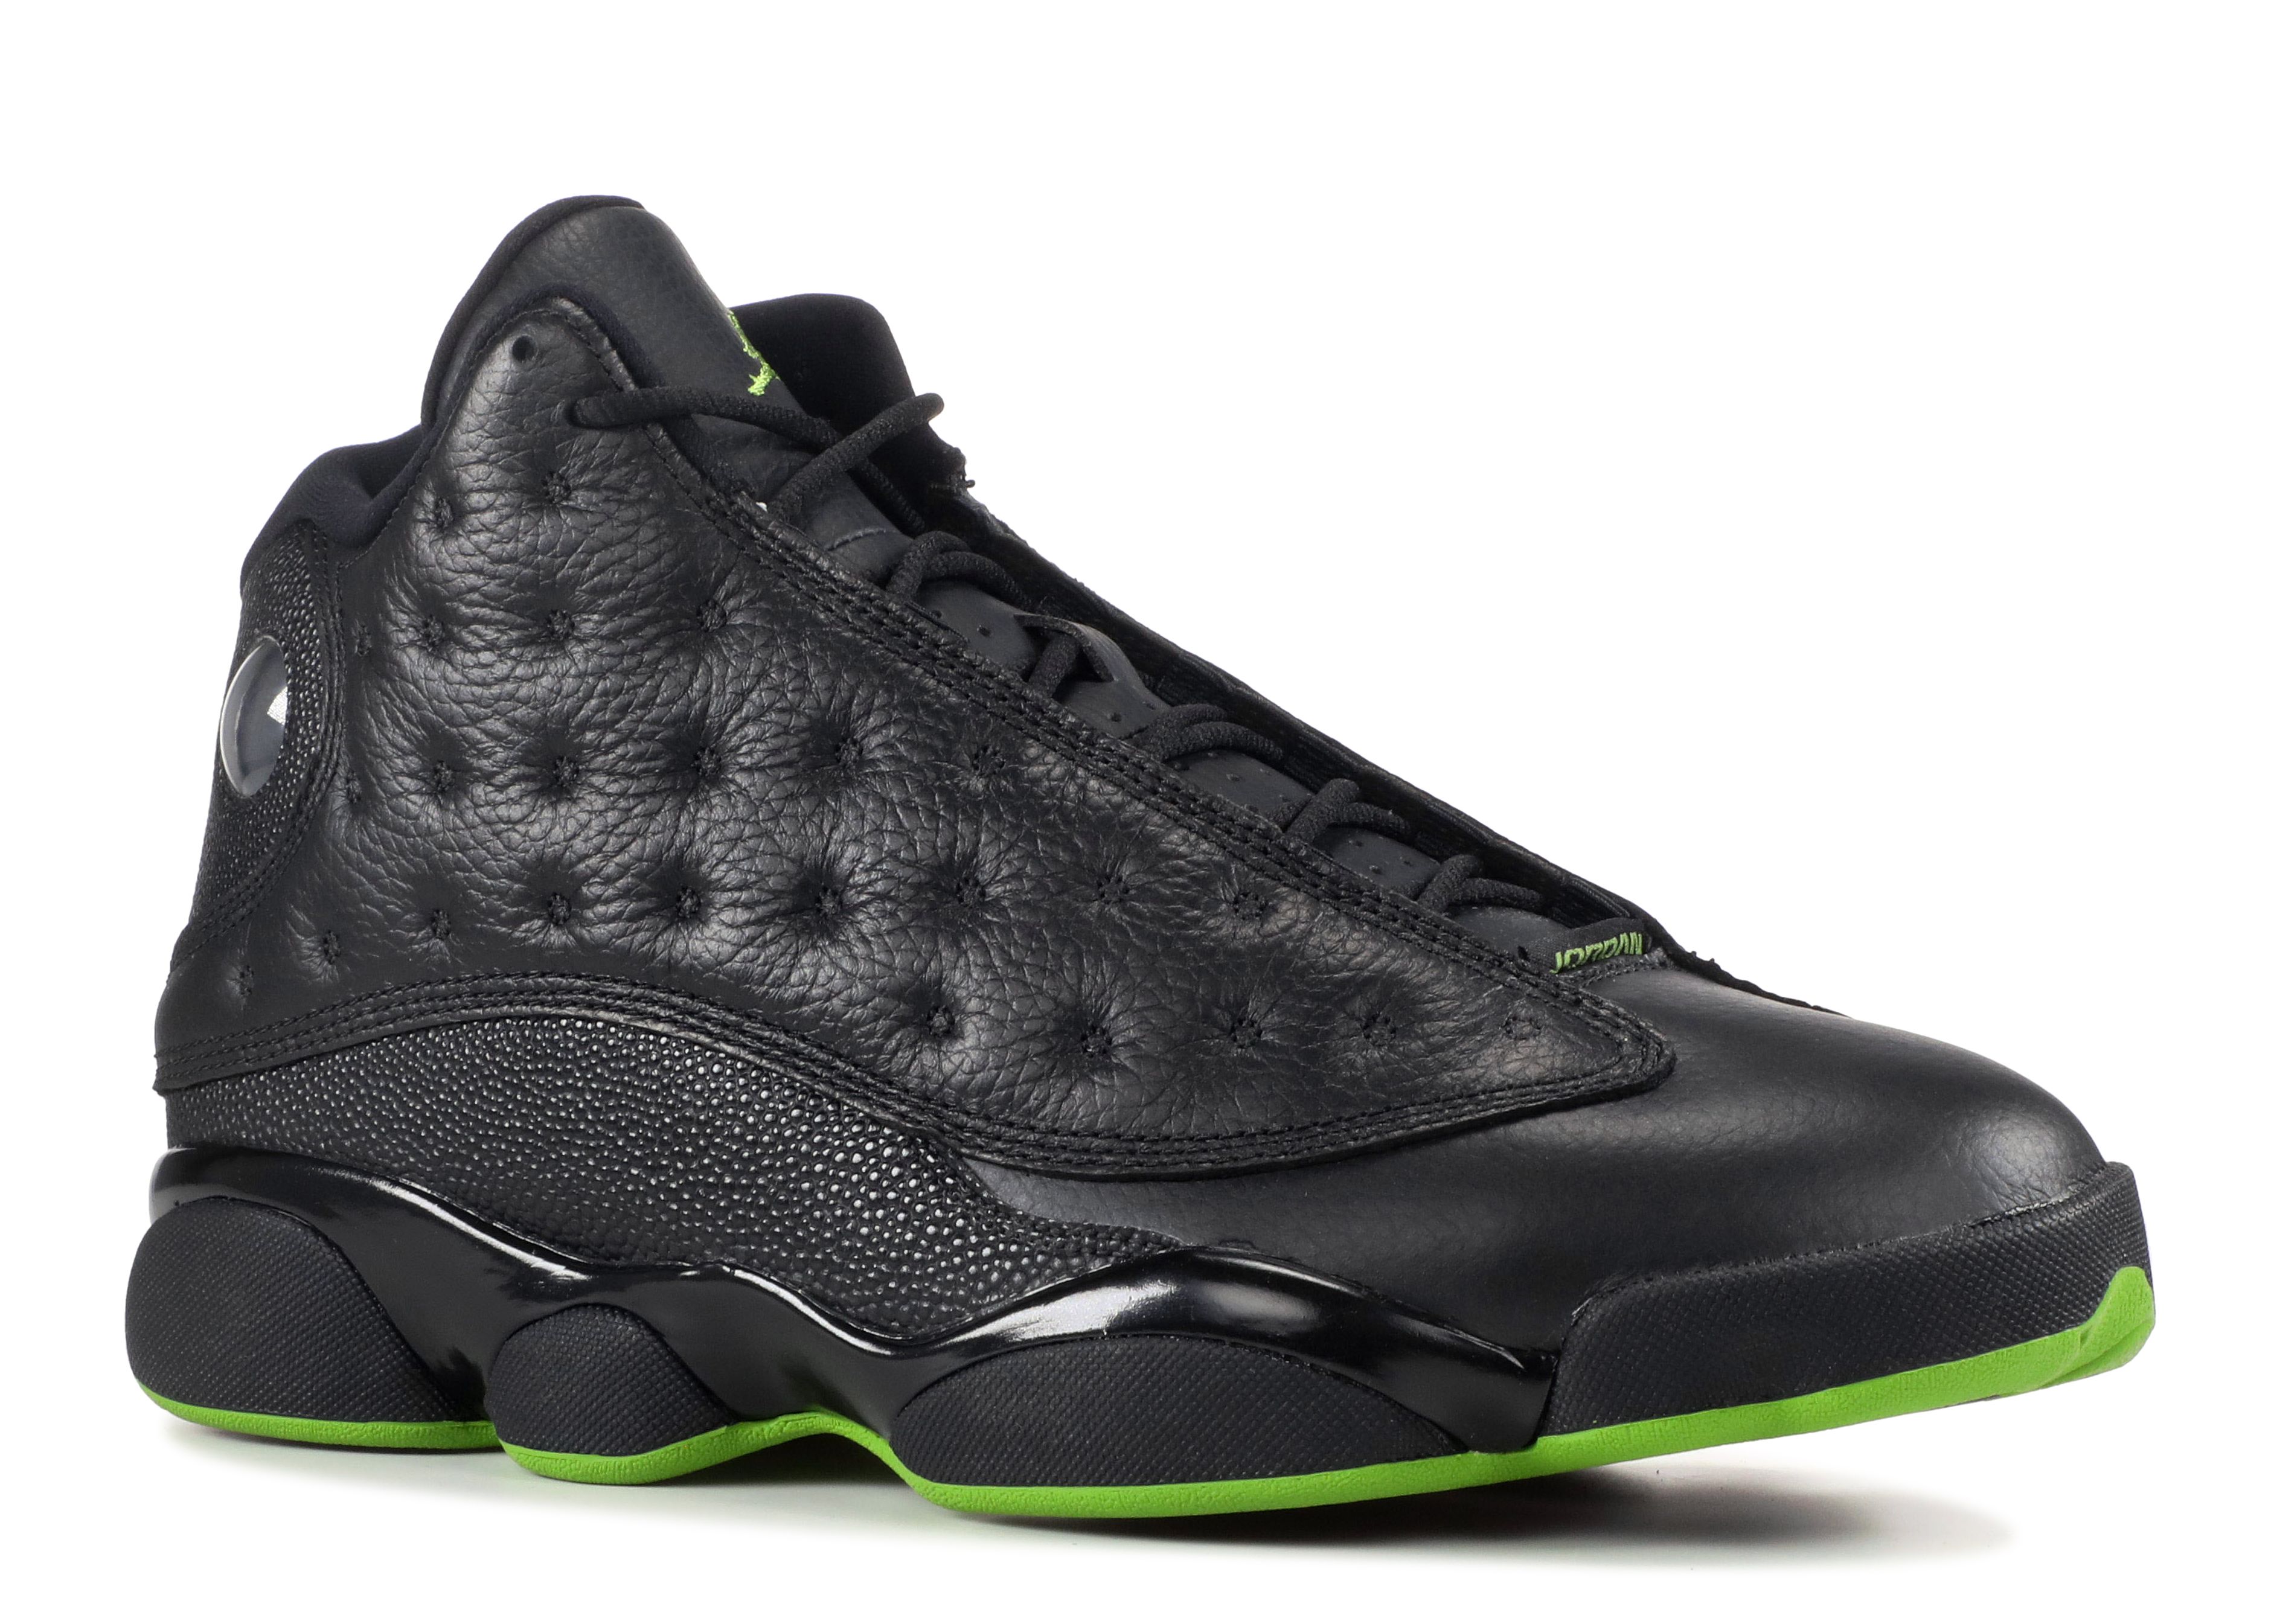 13s green and black